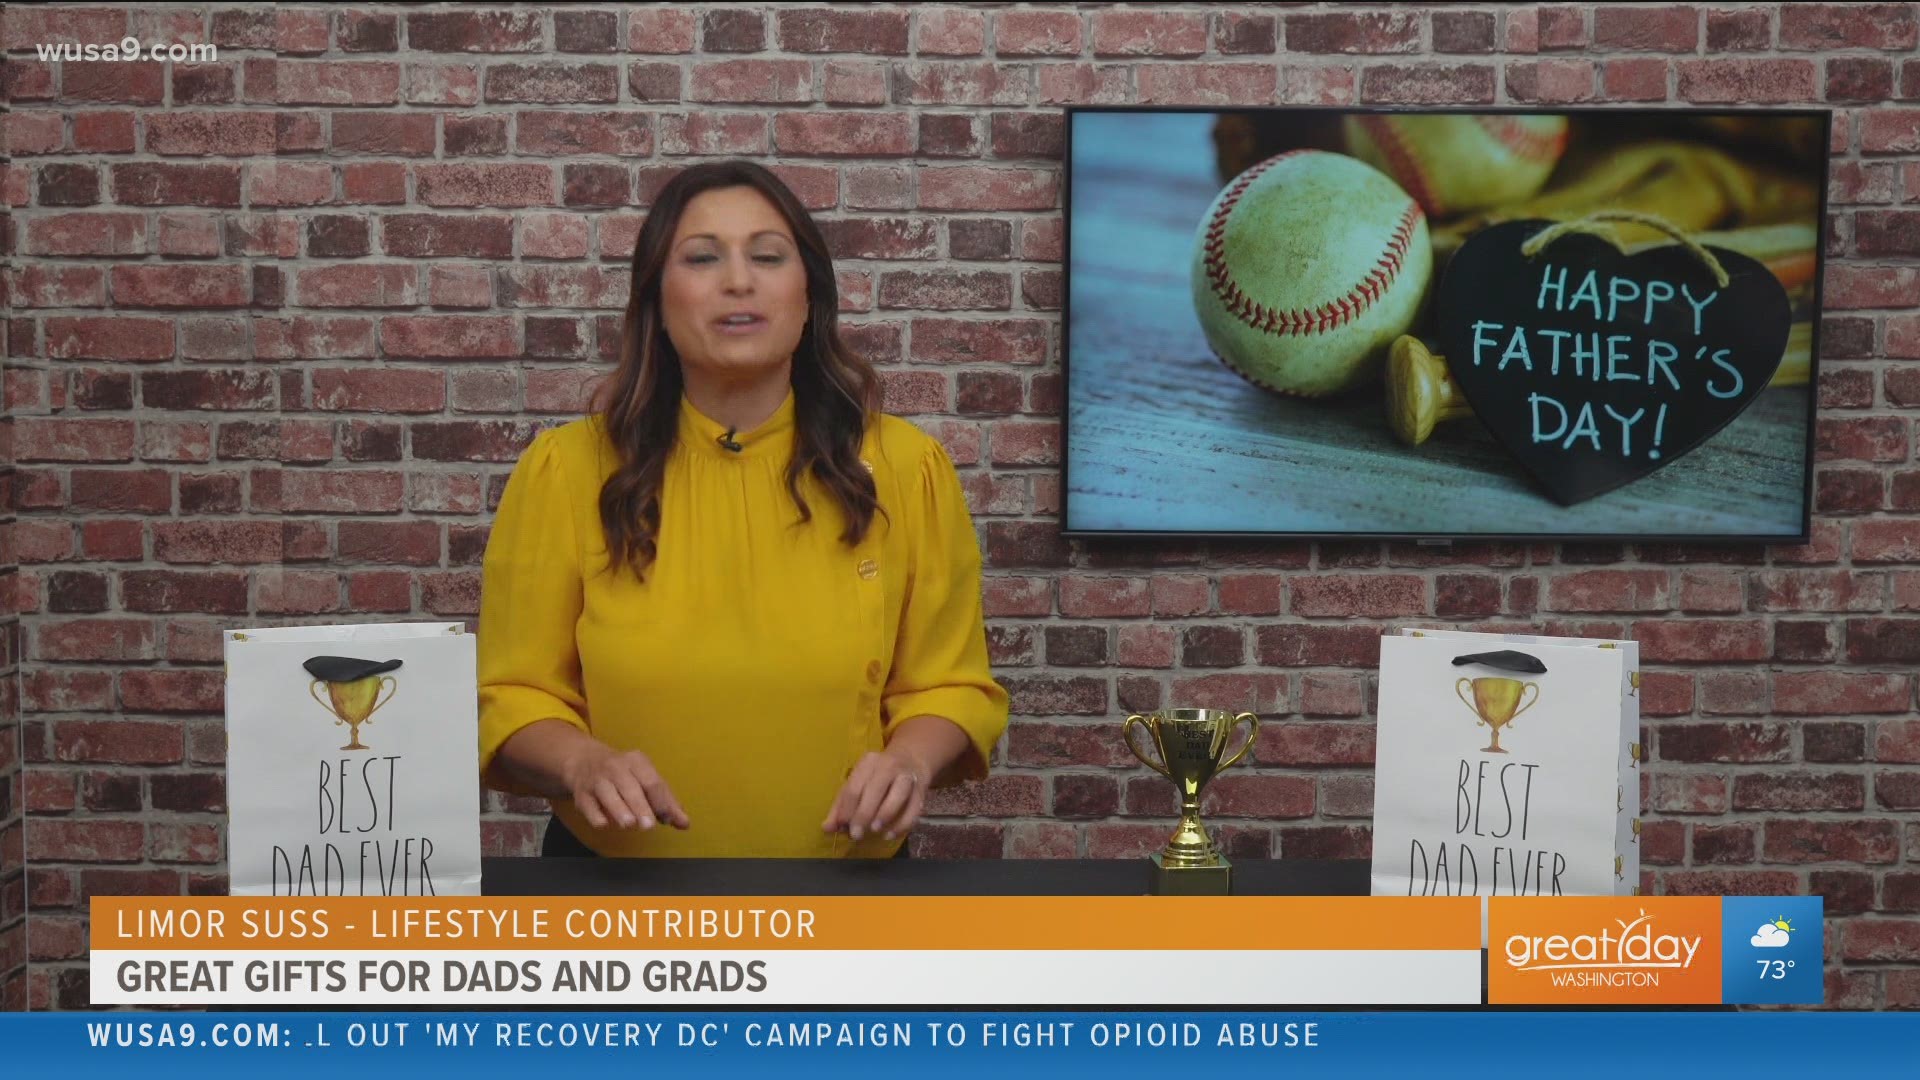 Still looking for great gifts for your dad? Check out these ideas from Lifestyle Expert Limor Suss. Sponsored by Limor Media.